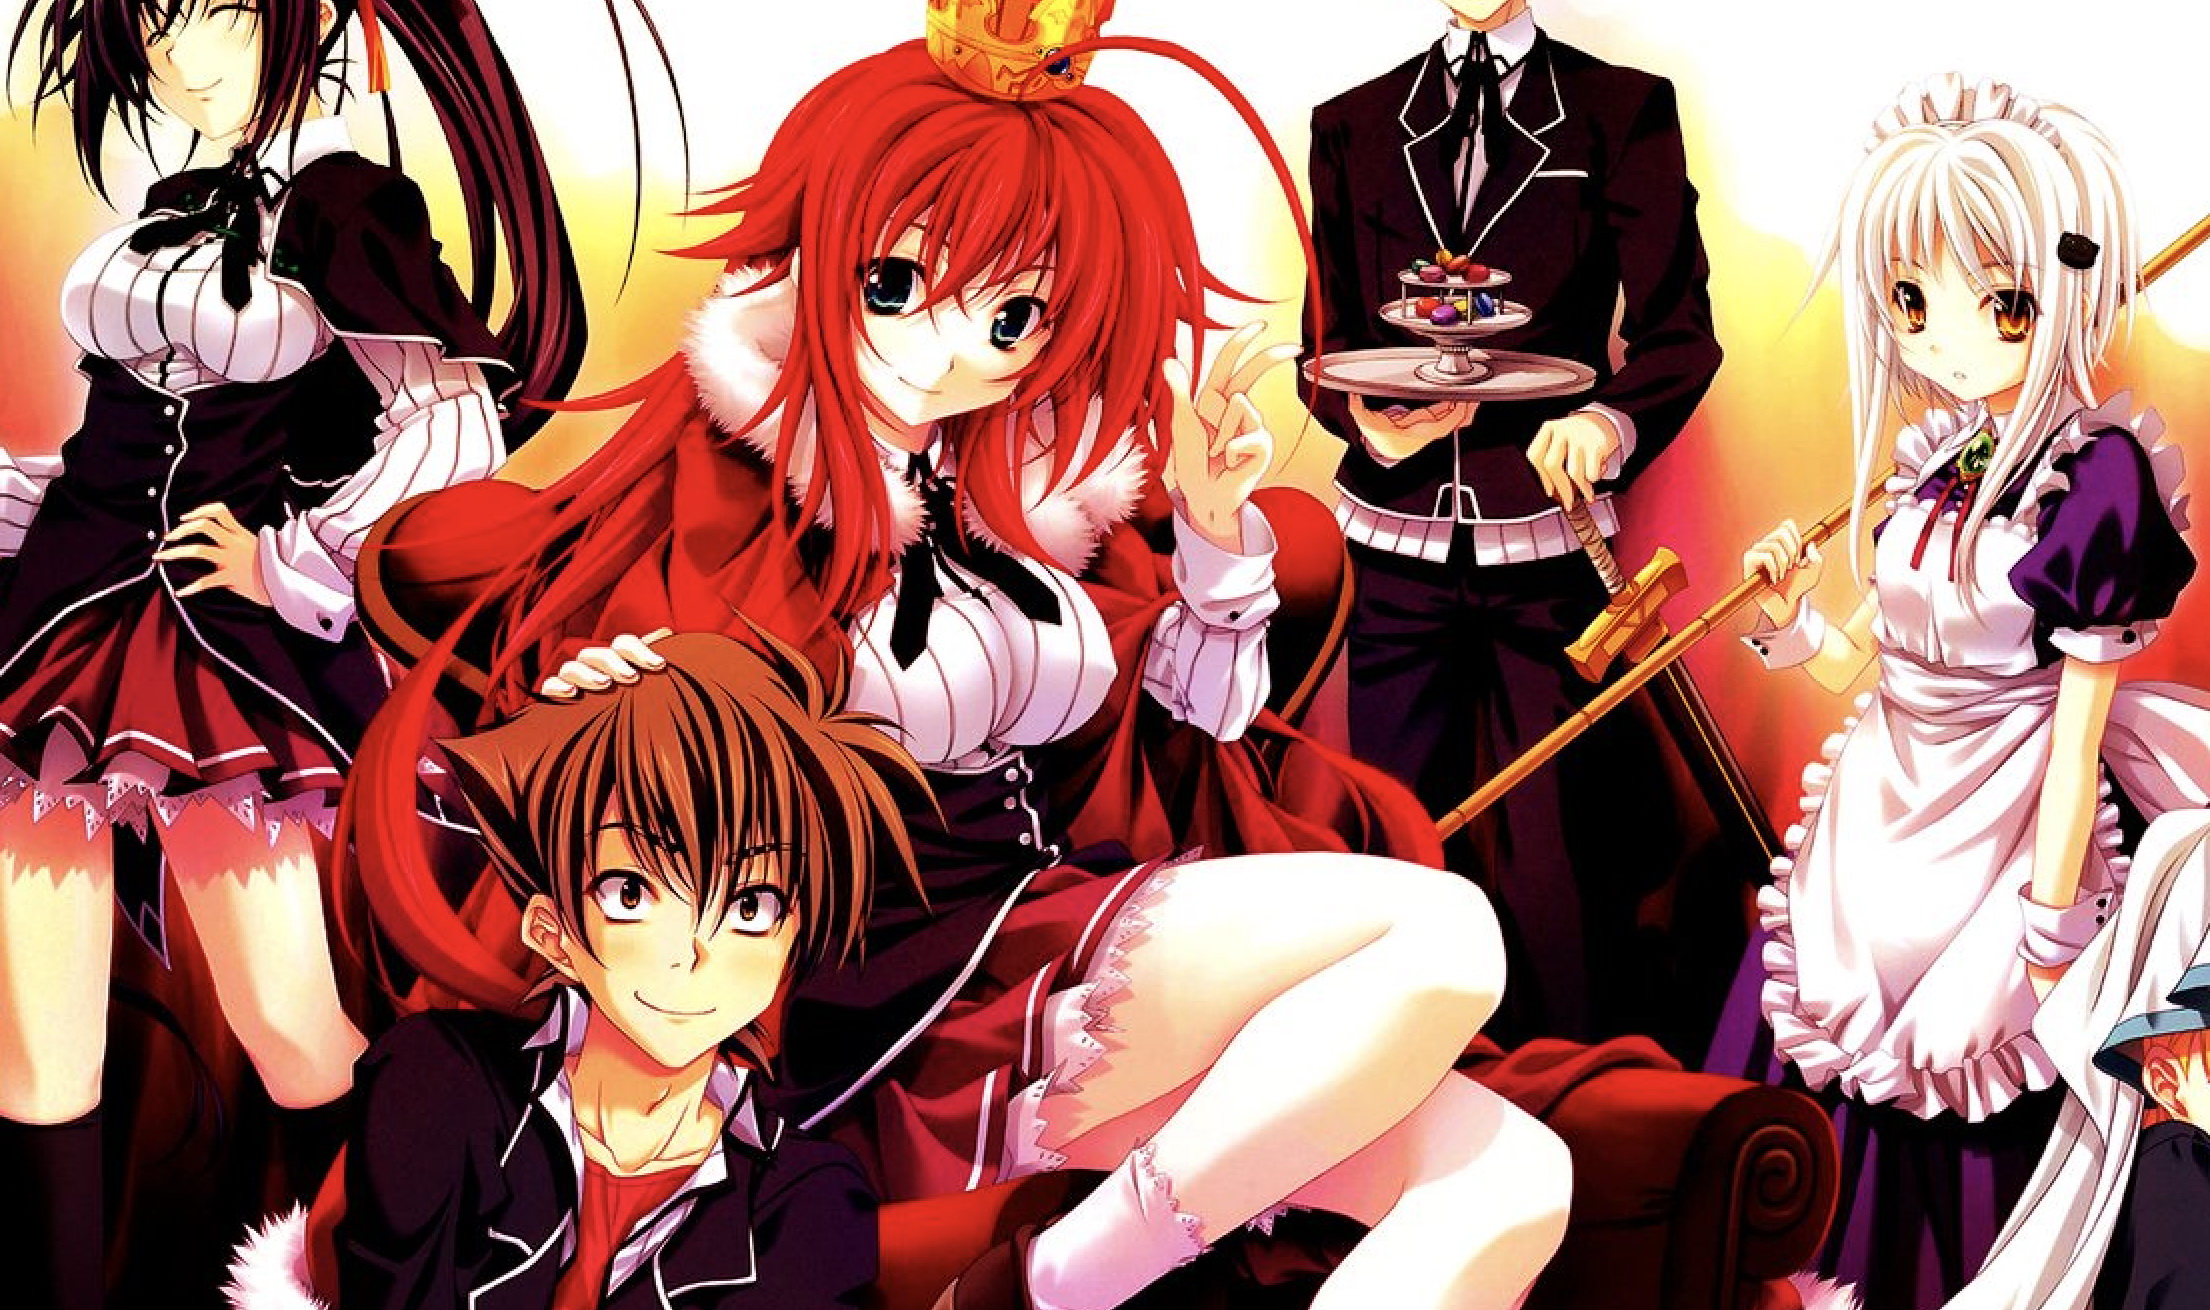 High school dxd born download free music apps for pc download